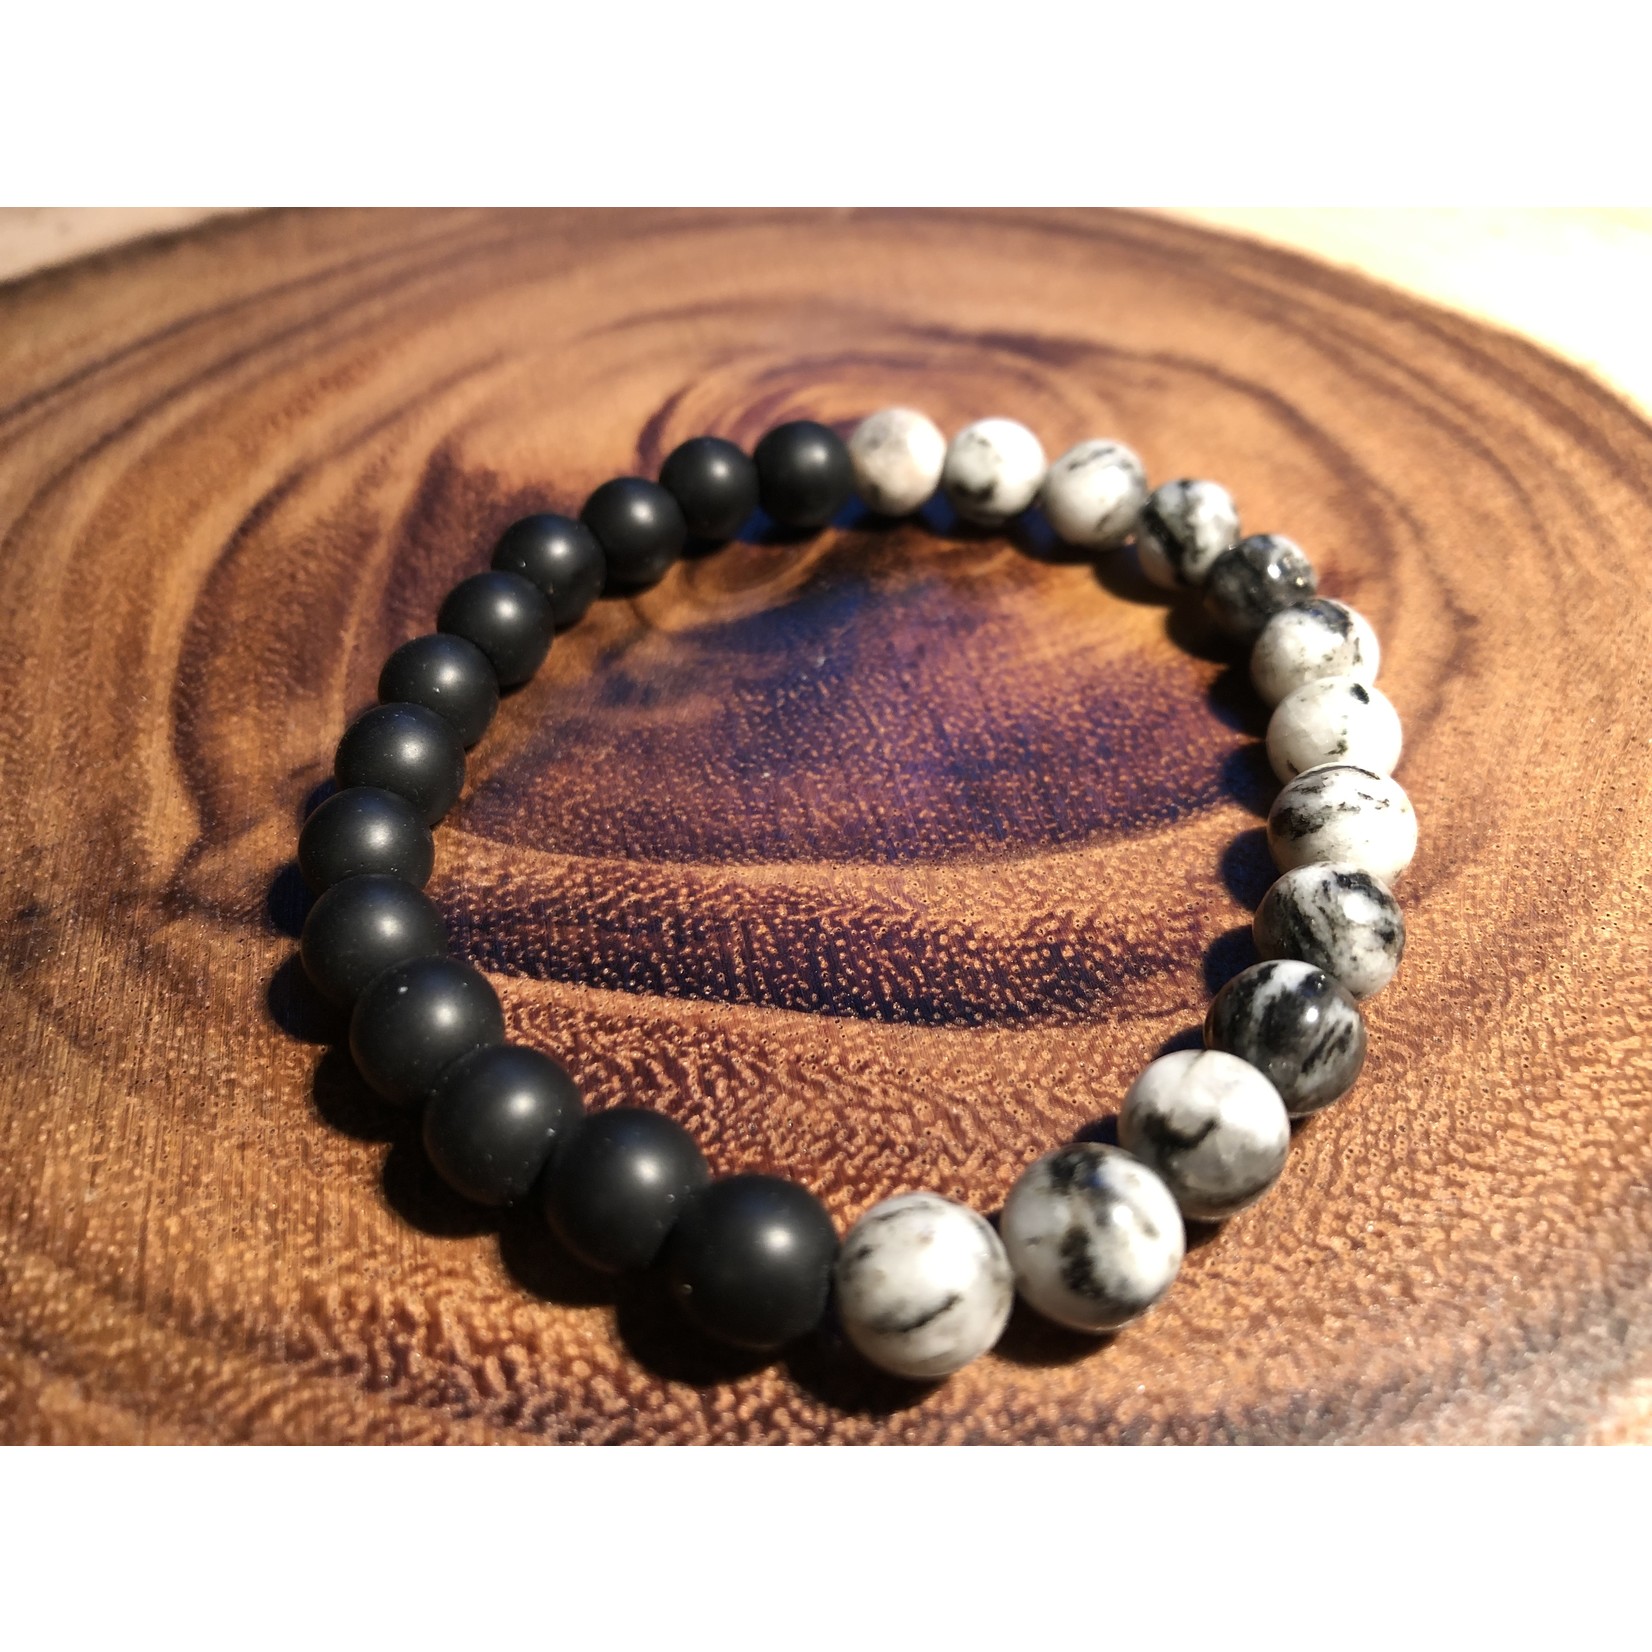 21cm Natural Stone and Wood Bracelets - A Blend of Nature and Elegance